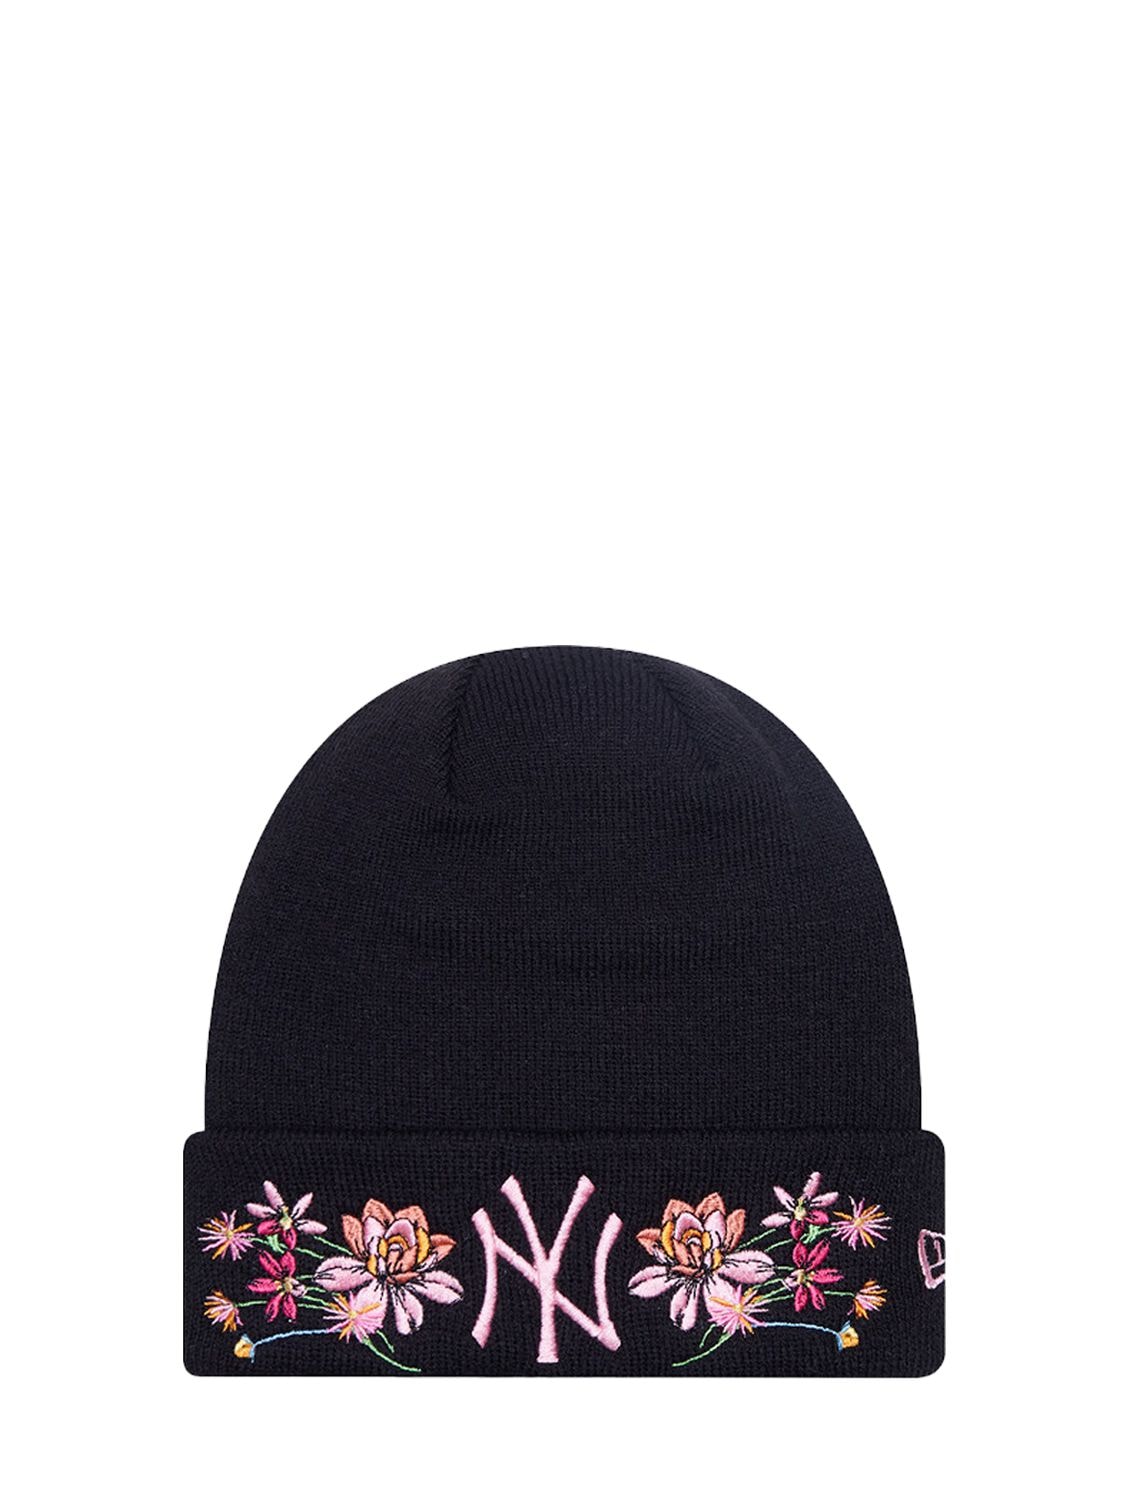 New Era Yankees Embroidered Tech Beanie In Black,pink